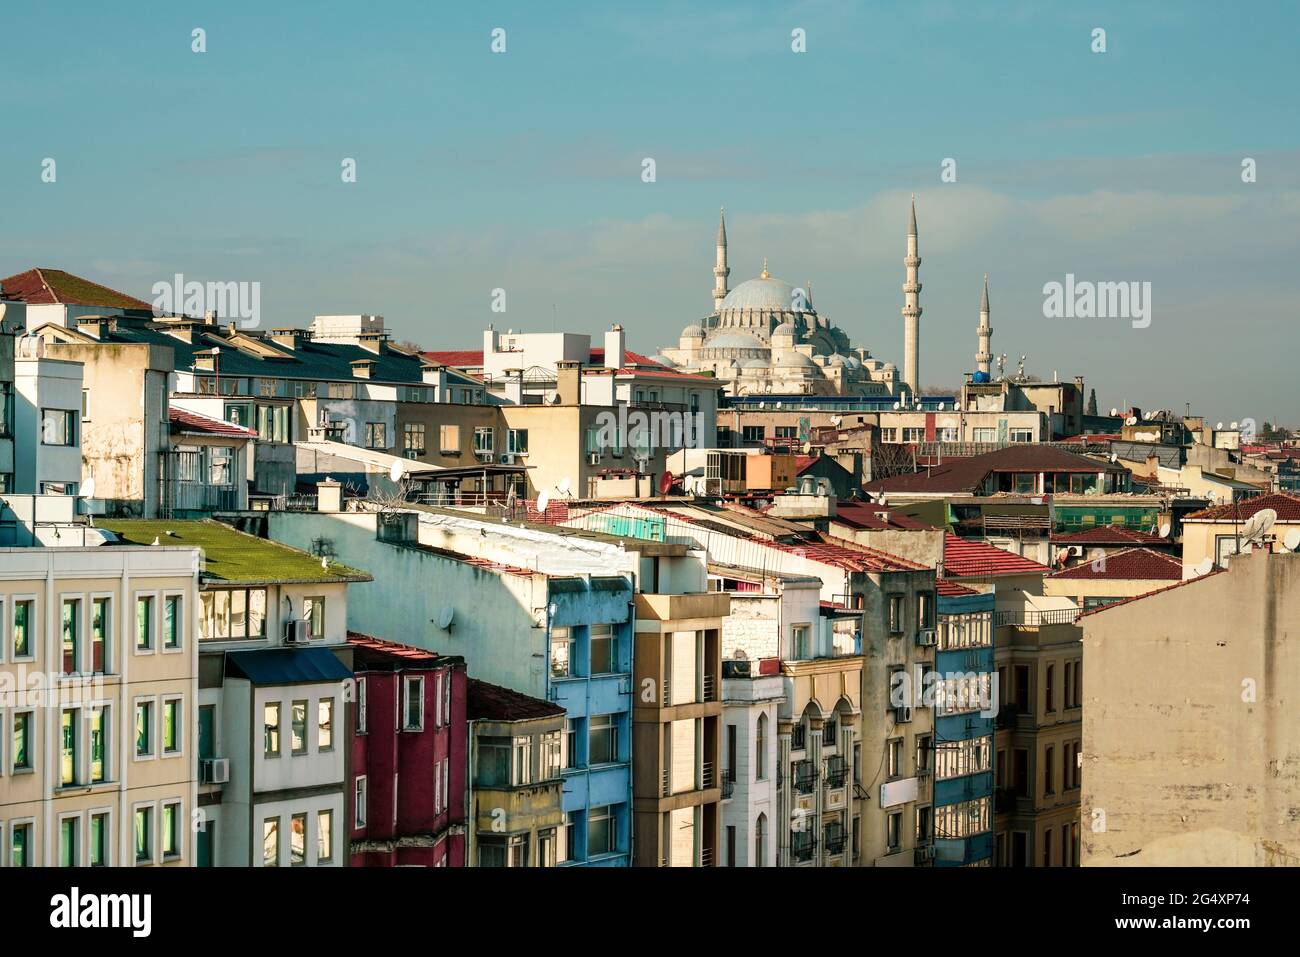 Turkey, Istanbul, Residential buildings in Fatih district with Suleymaniye Mosque in background Stock Photo